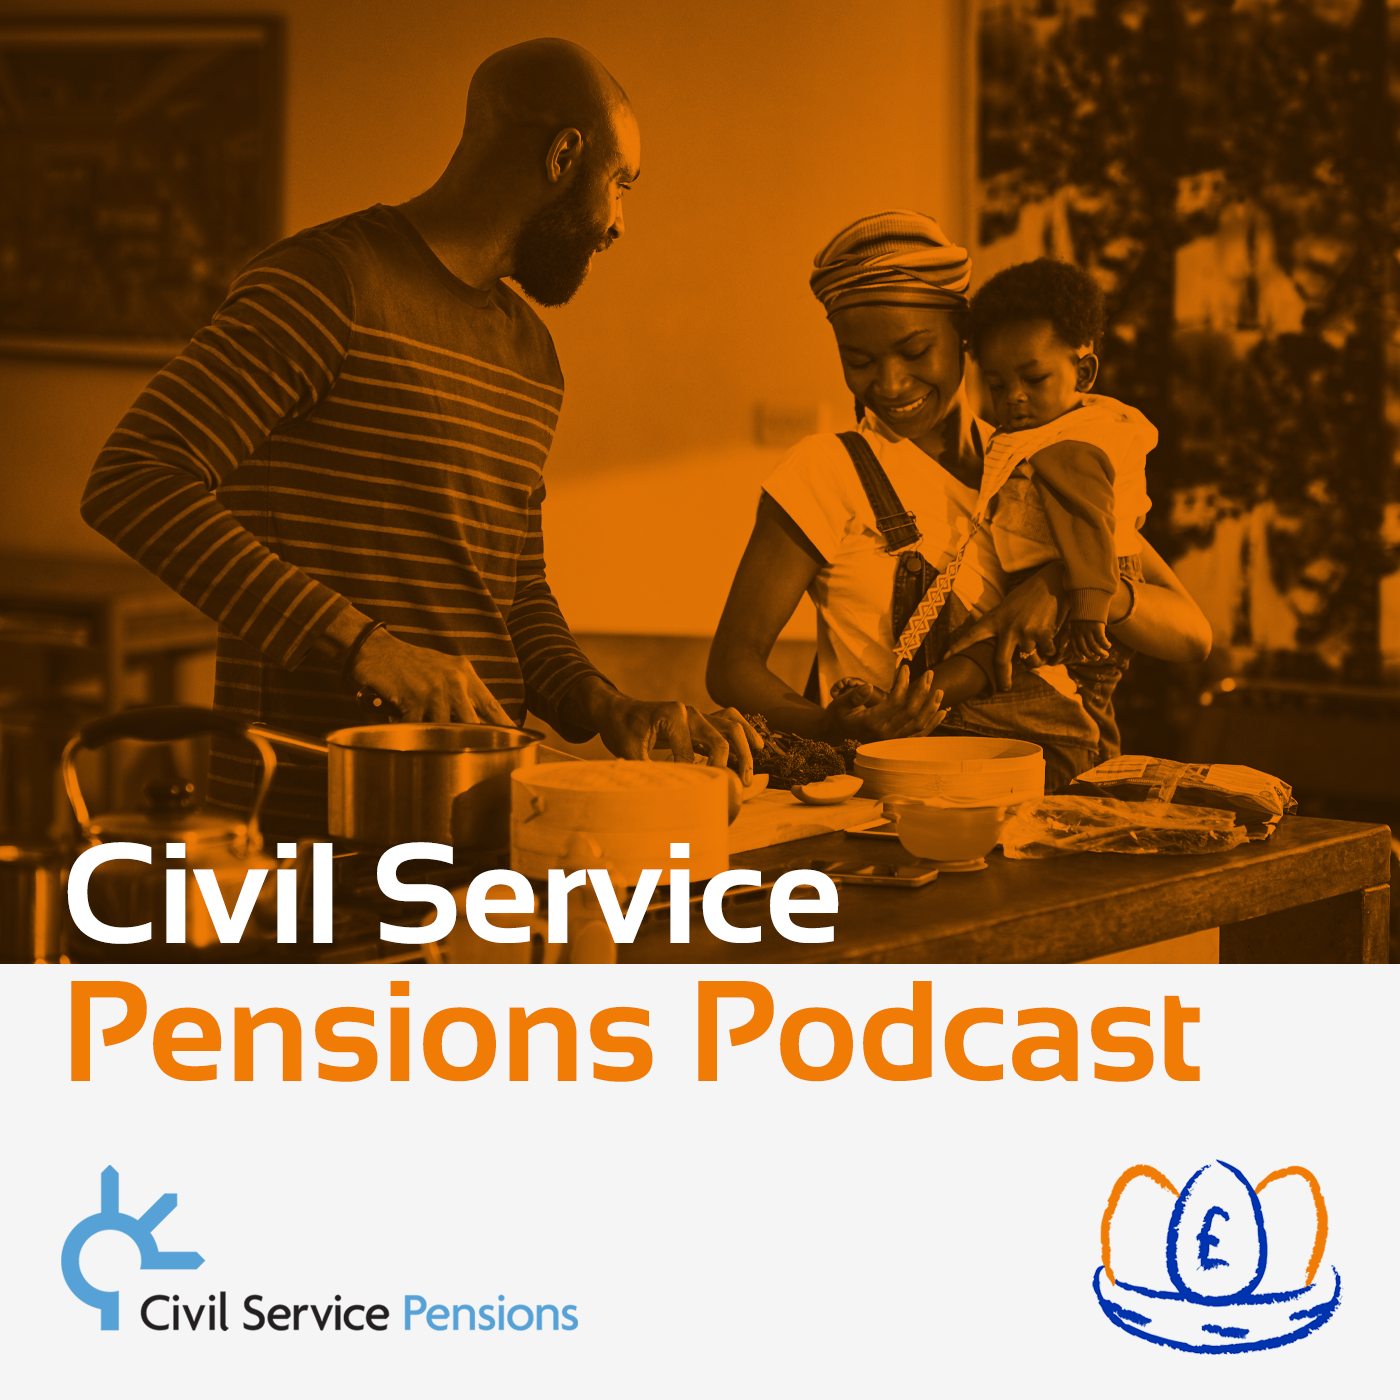 What are our members saying about pensions?